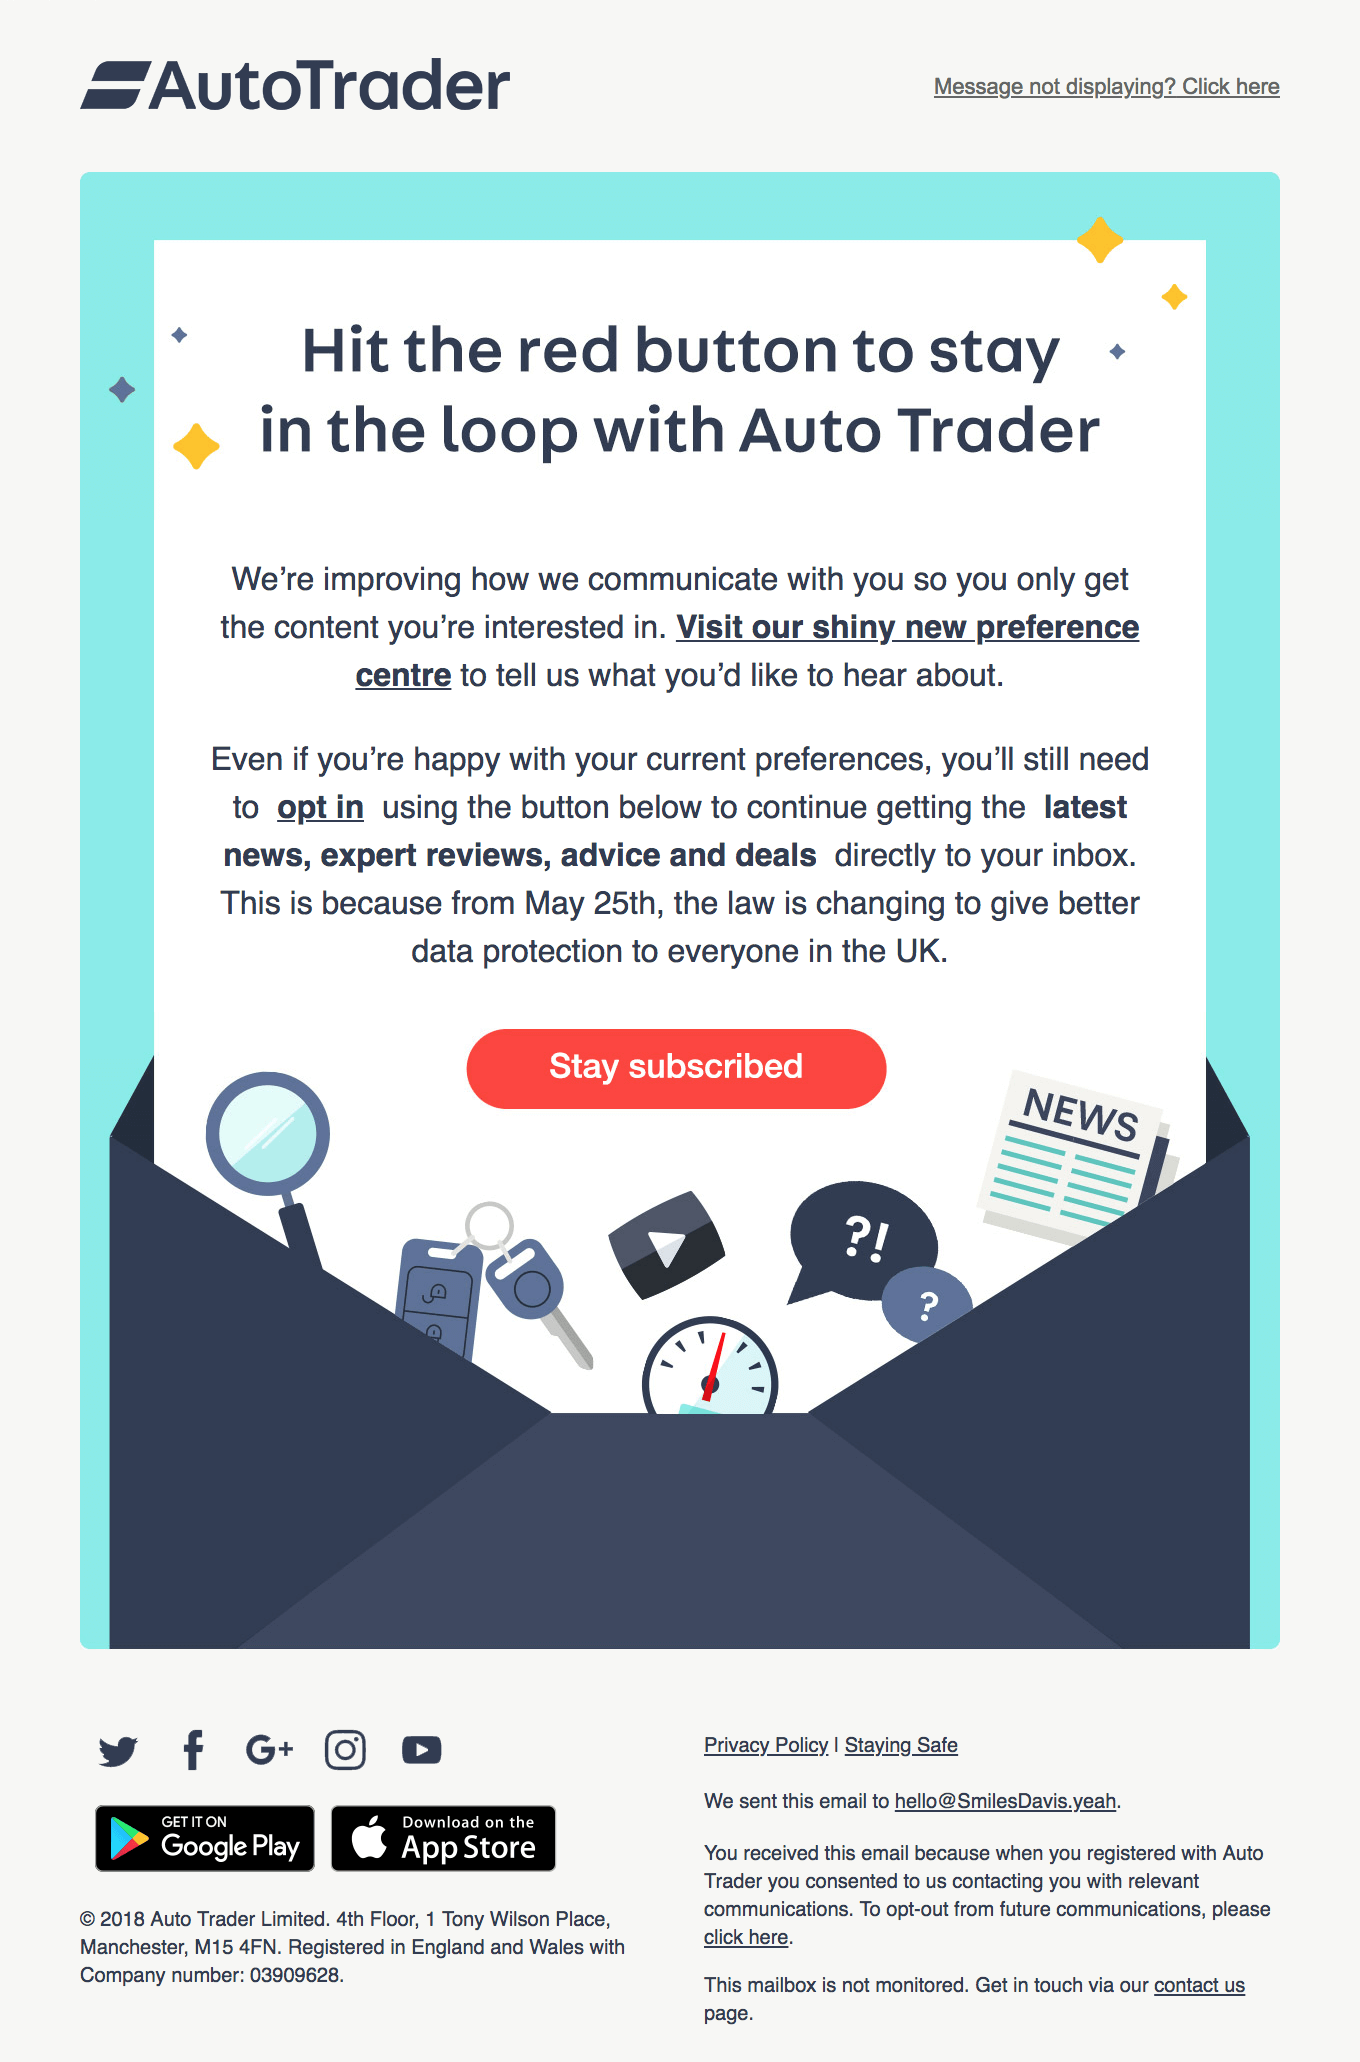 AutoTrader opt-in email example